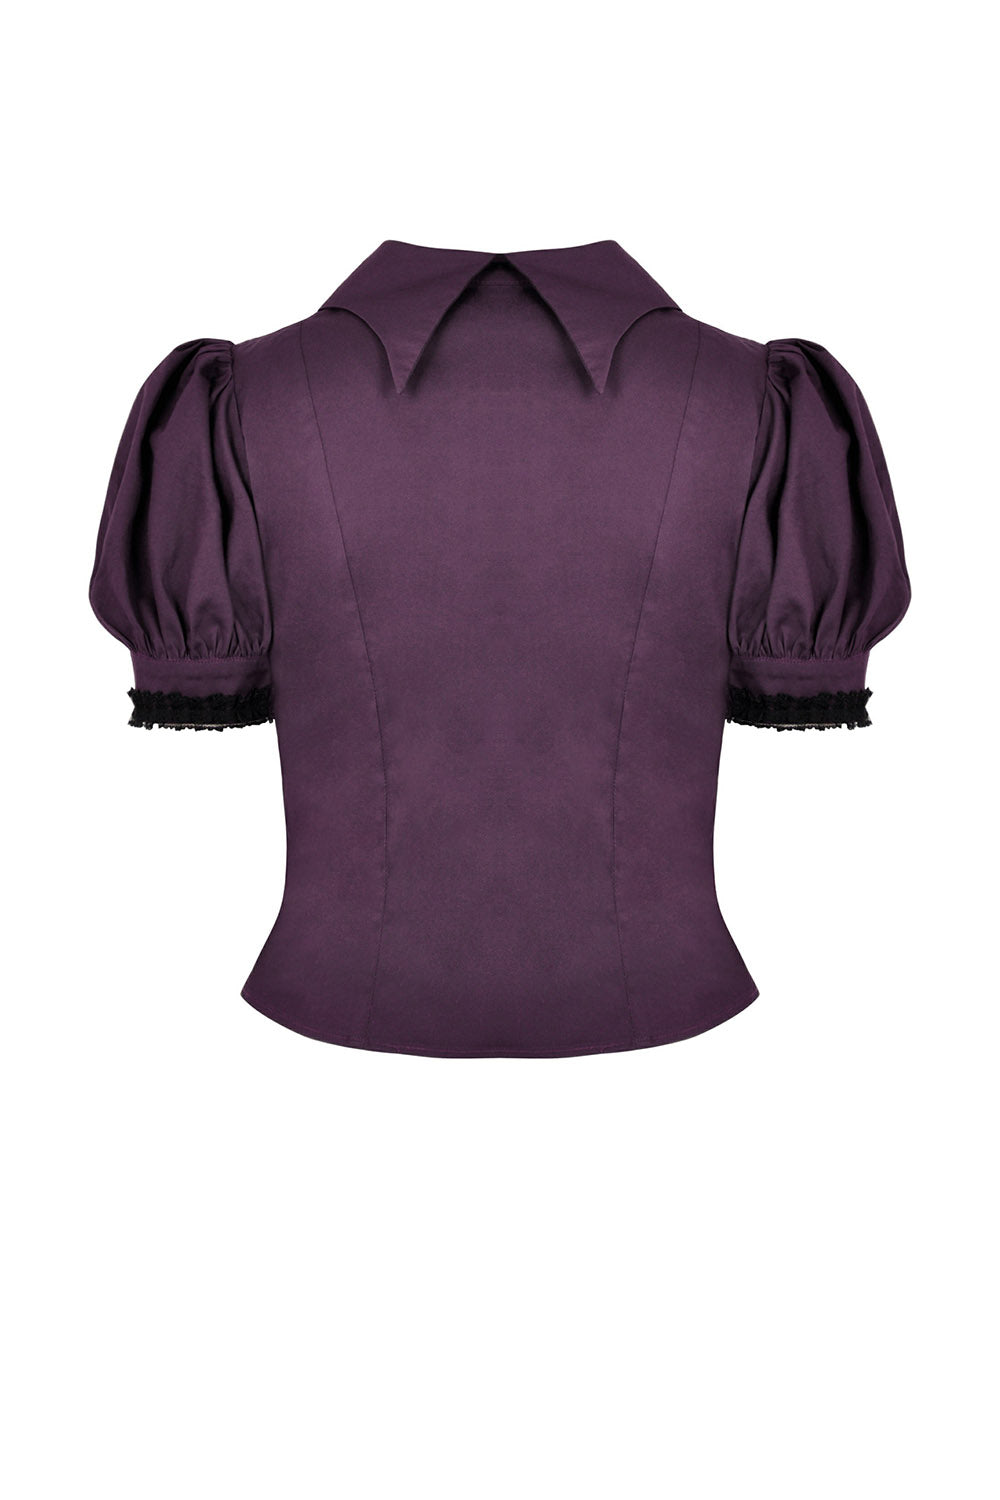 witch top for women